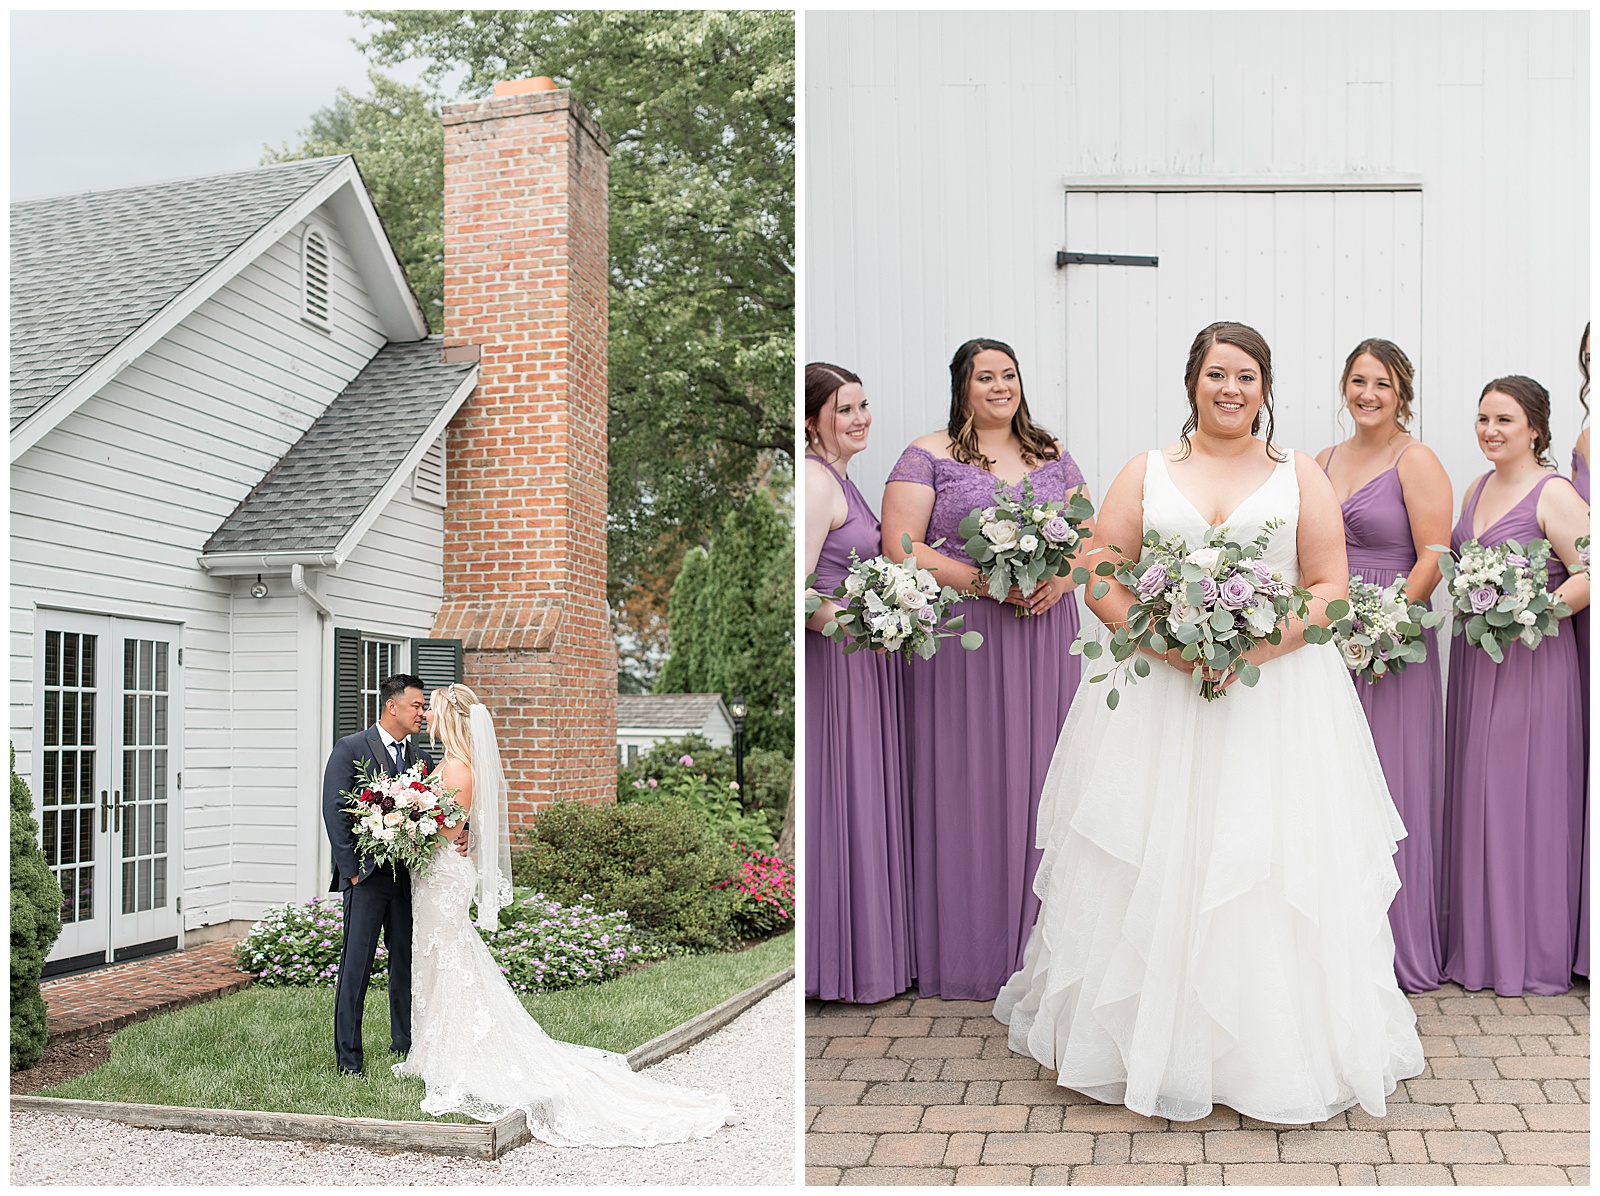 bride standing slightly in front of bridesmaids who are wearing light purple gowns and all holding bouquets by white barn door